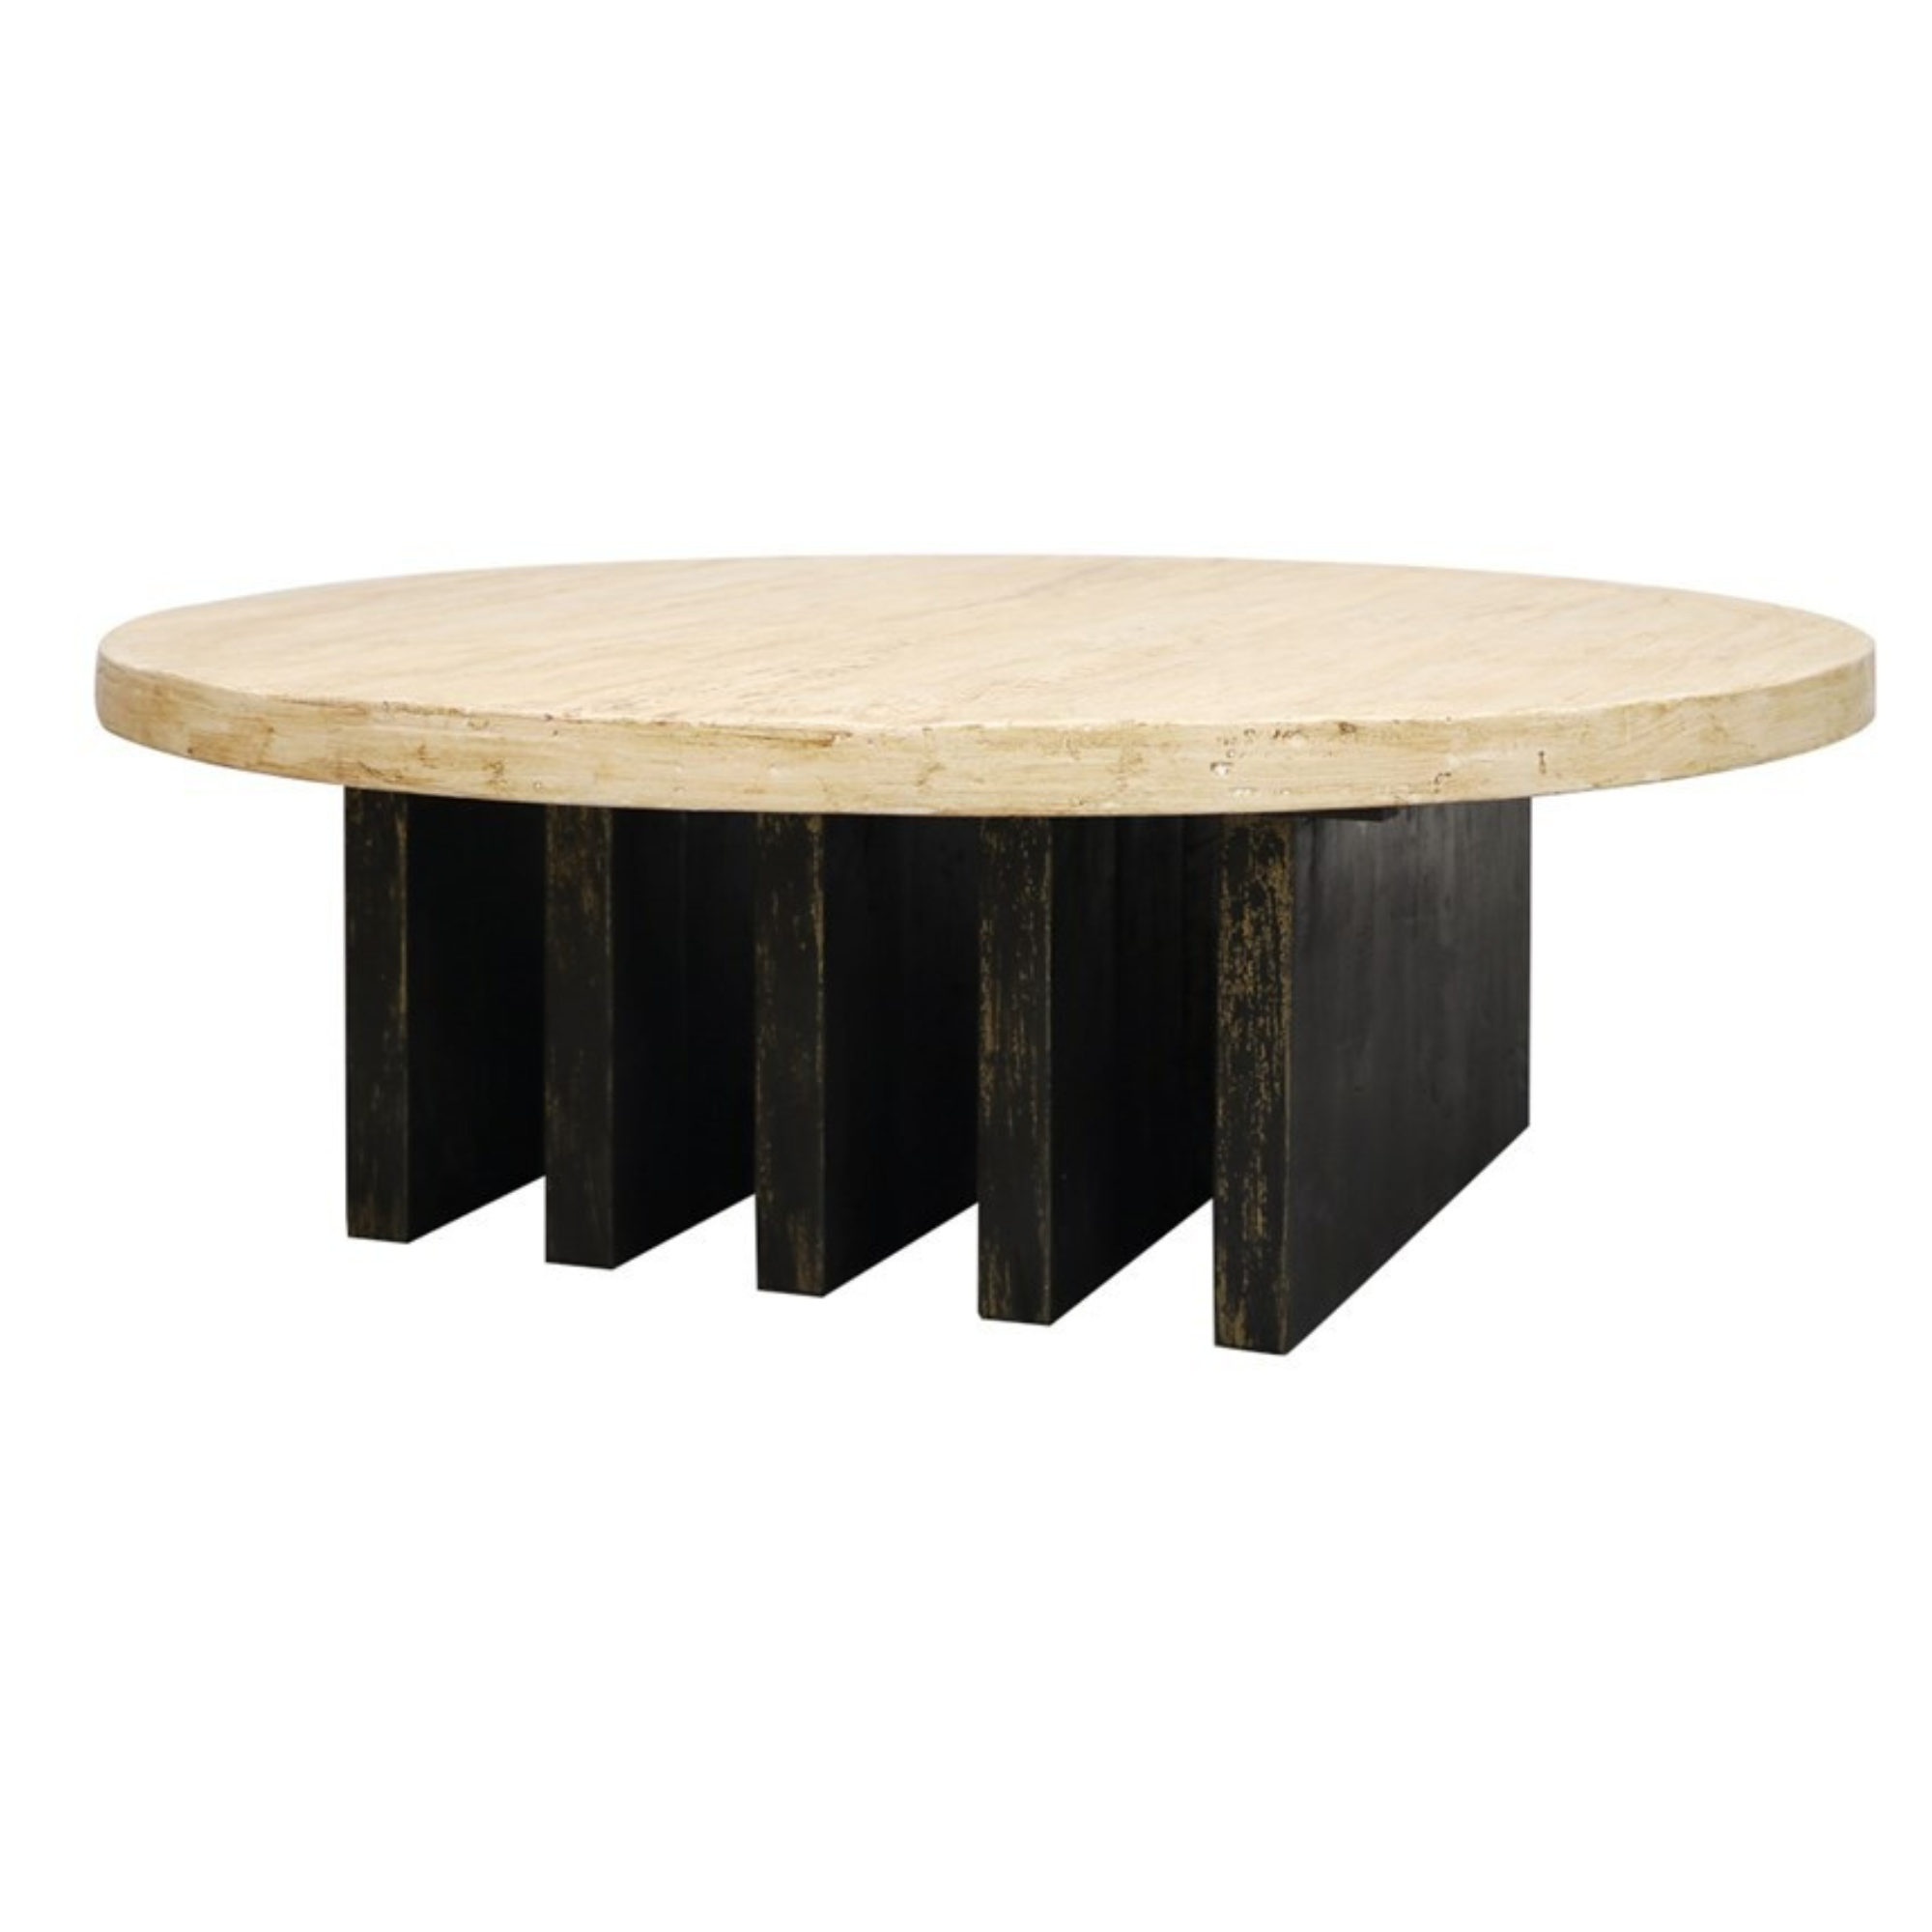 LIMITED EDITION ROUND COFFEE TABLE